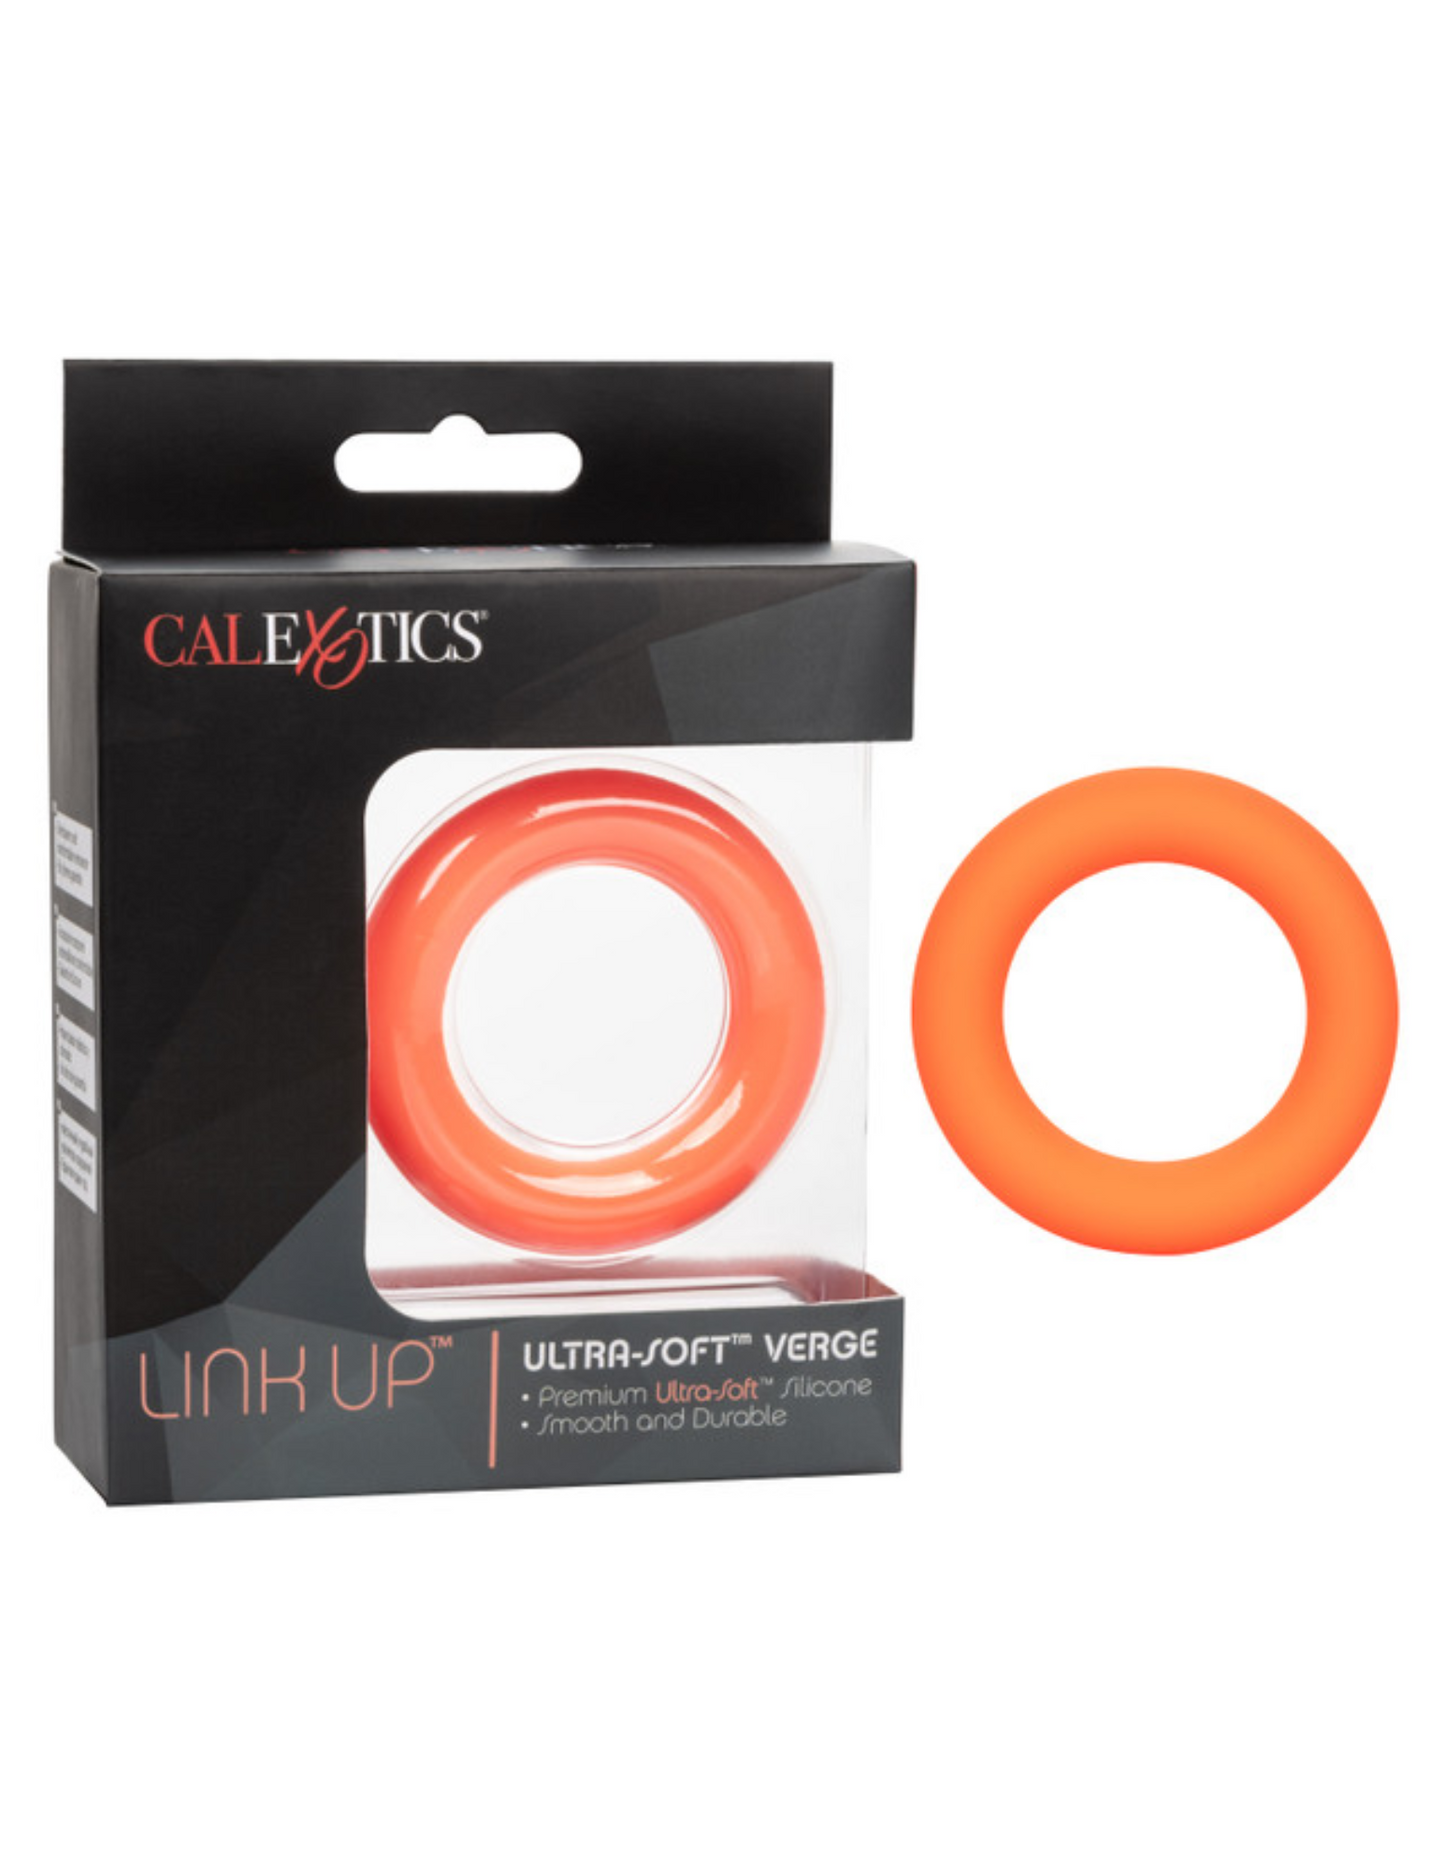 Photo of the  Link Up Ultra Soft Verge Silicone Cock Ring, from CalExotics (orange) box and product.